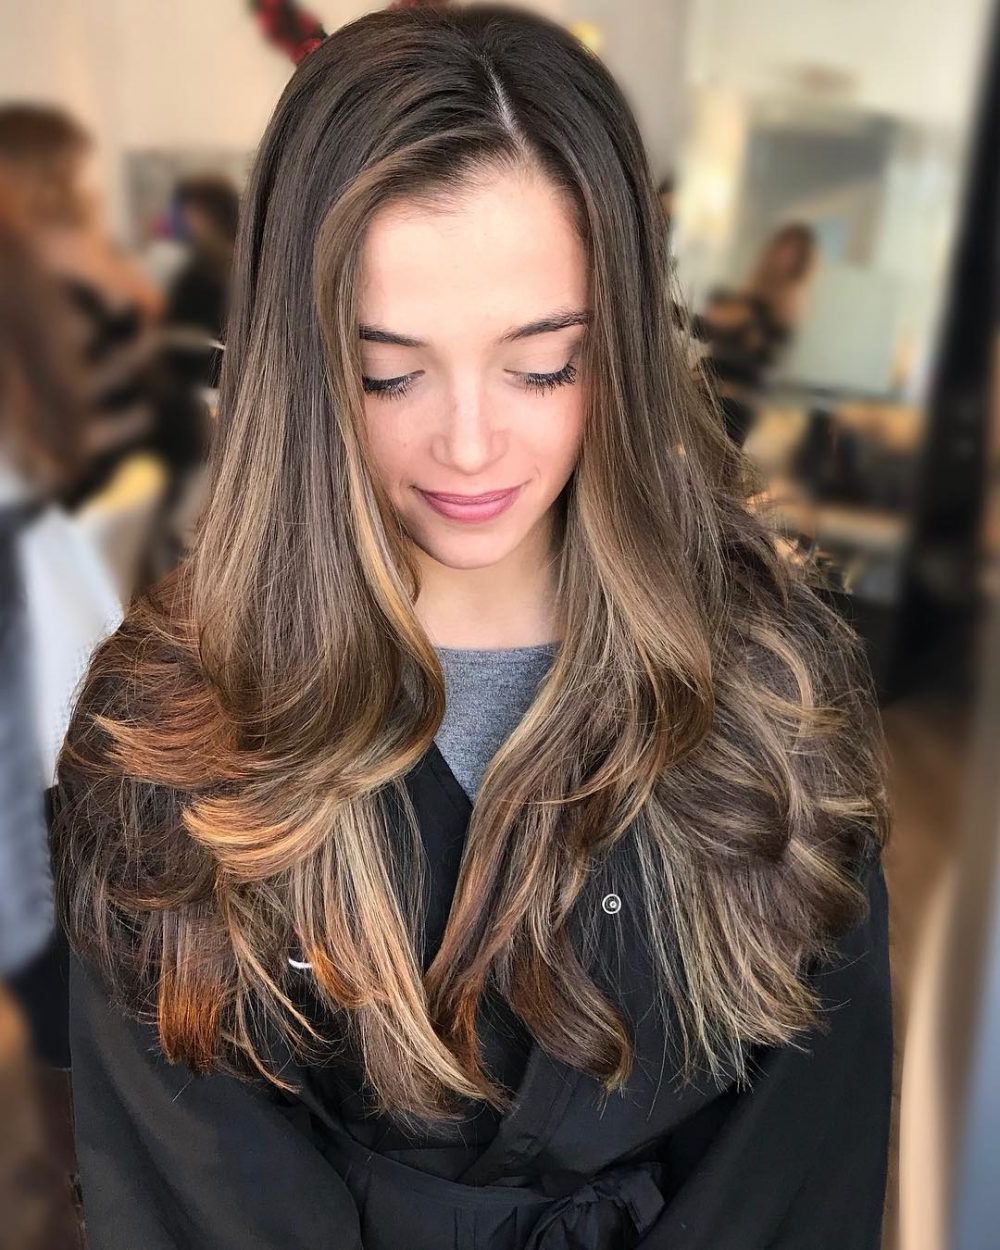 26 Prettiest Hairstyles For Long Straight Hair In 2019 Pertaining To 2019 Chopped Chocolate Brown Hairstyles For Long Hair (View 17 of 20)